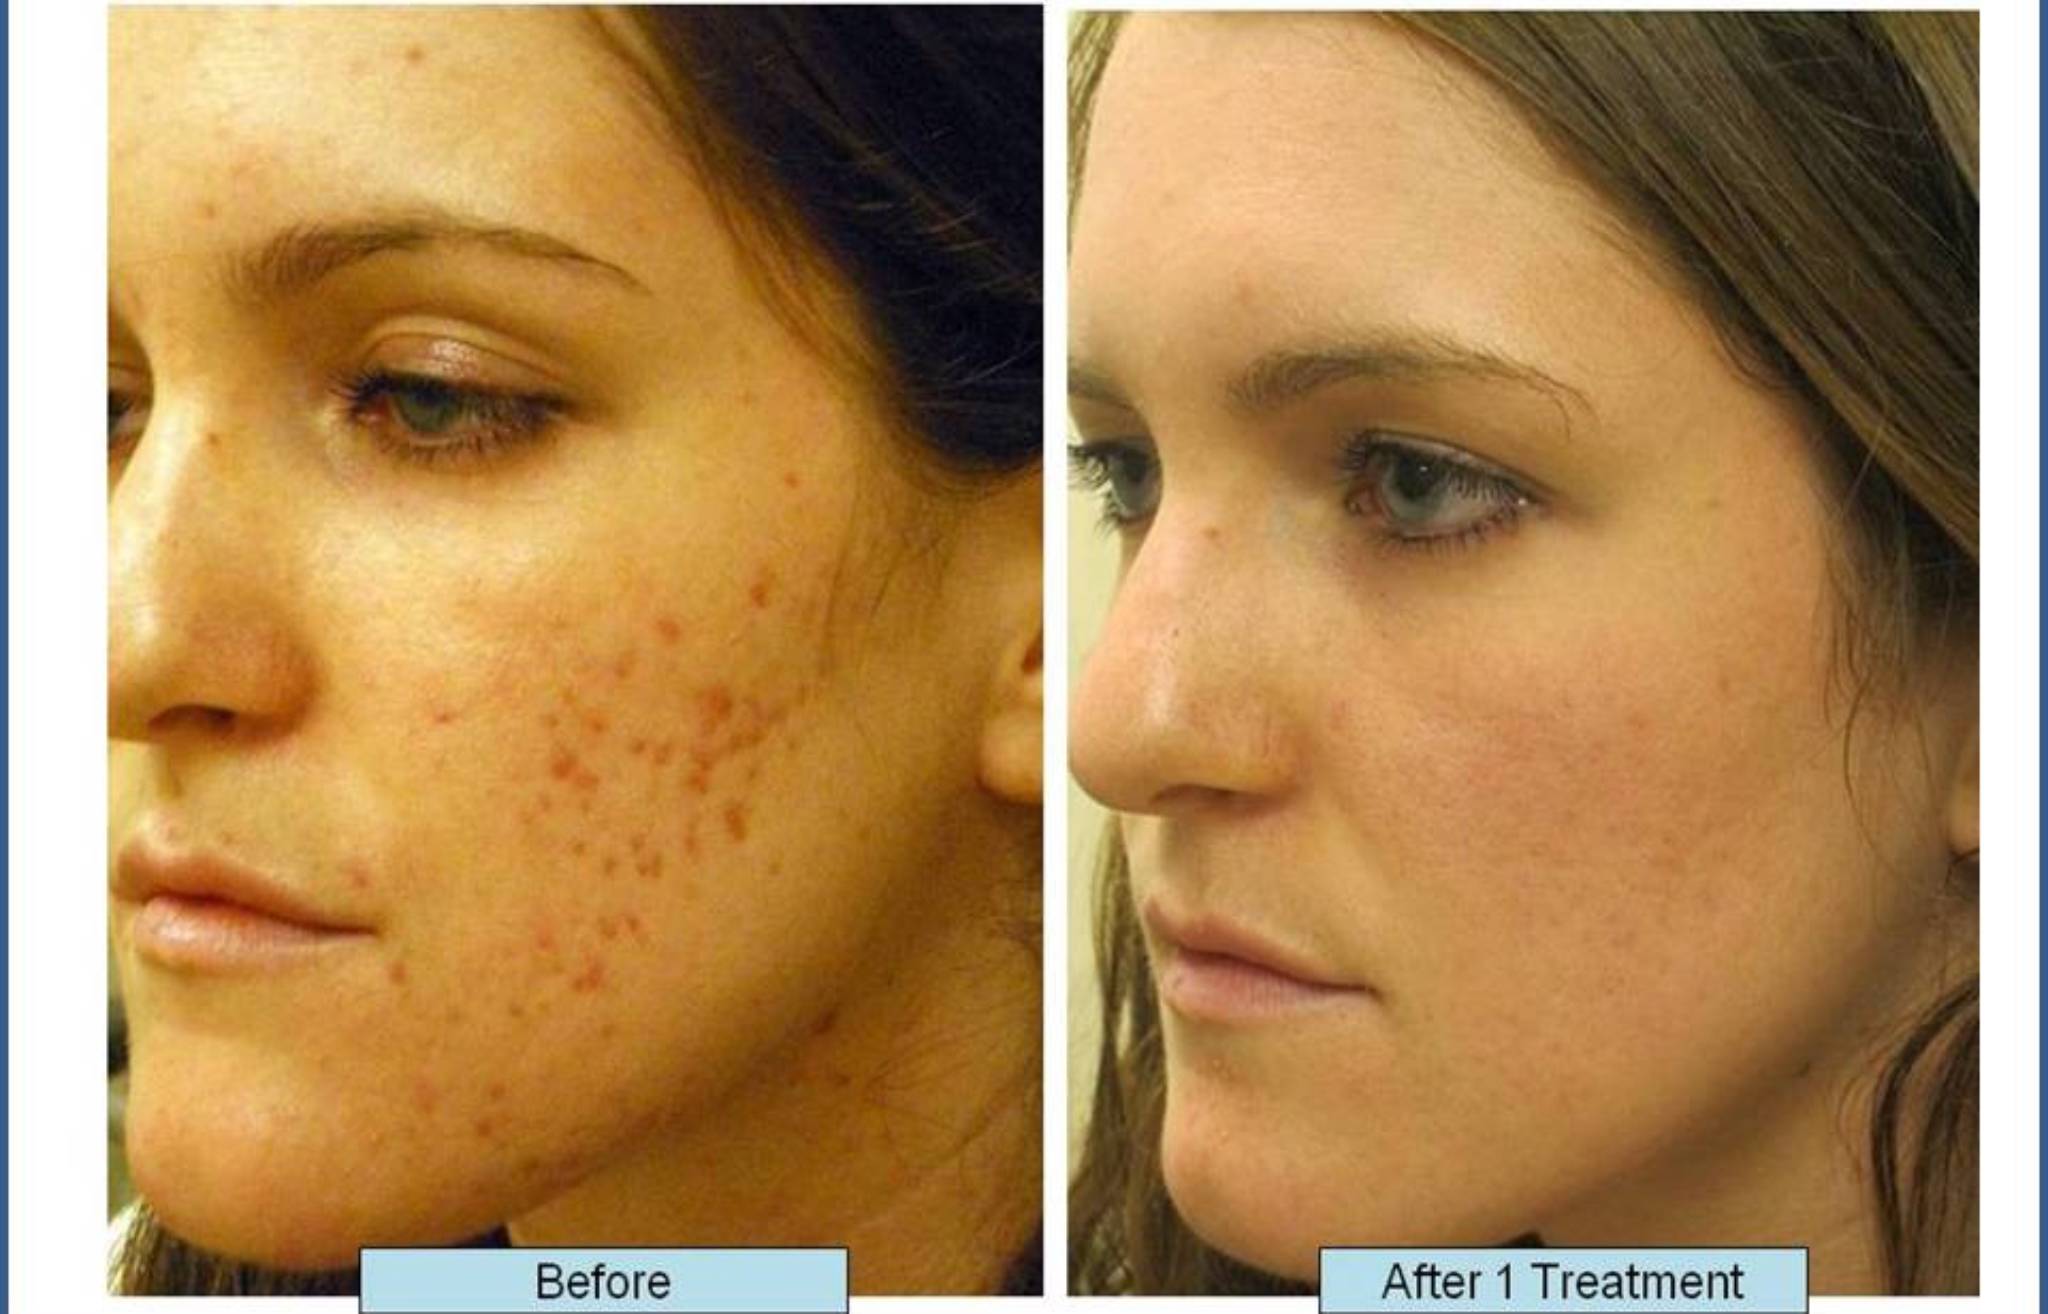 elegant-makeup-with-acne-scars-home-remedies-with-ask-the-acne-expert-when-should-a-new-acne-scar-be-treated (1)